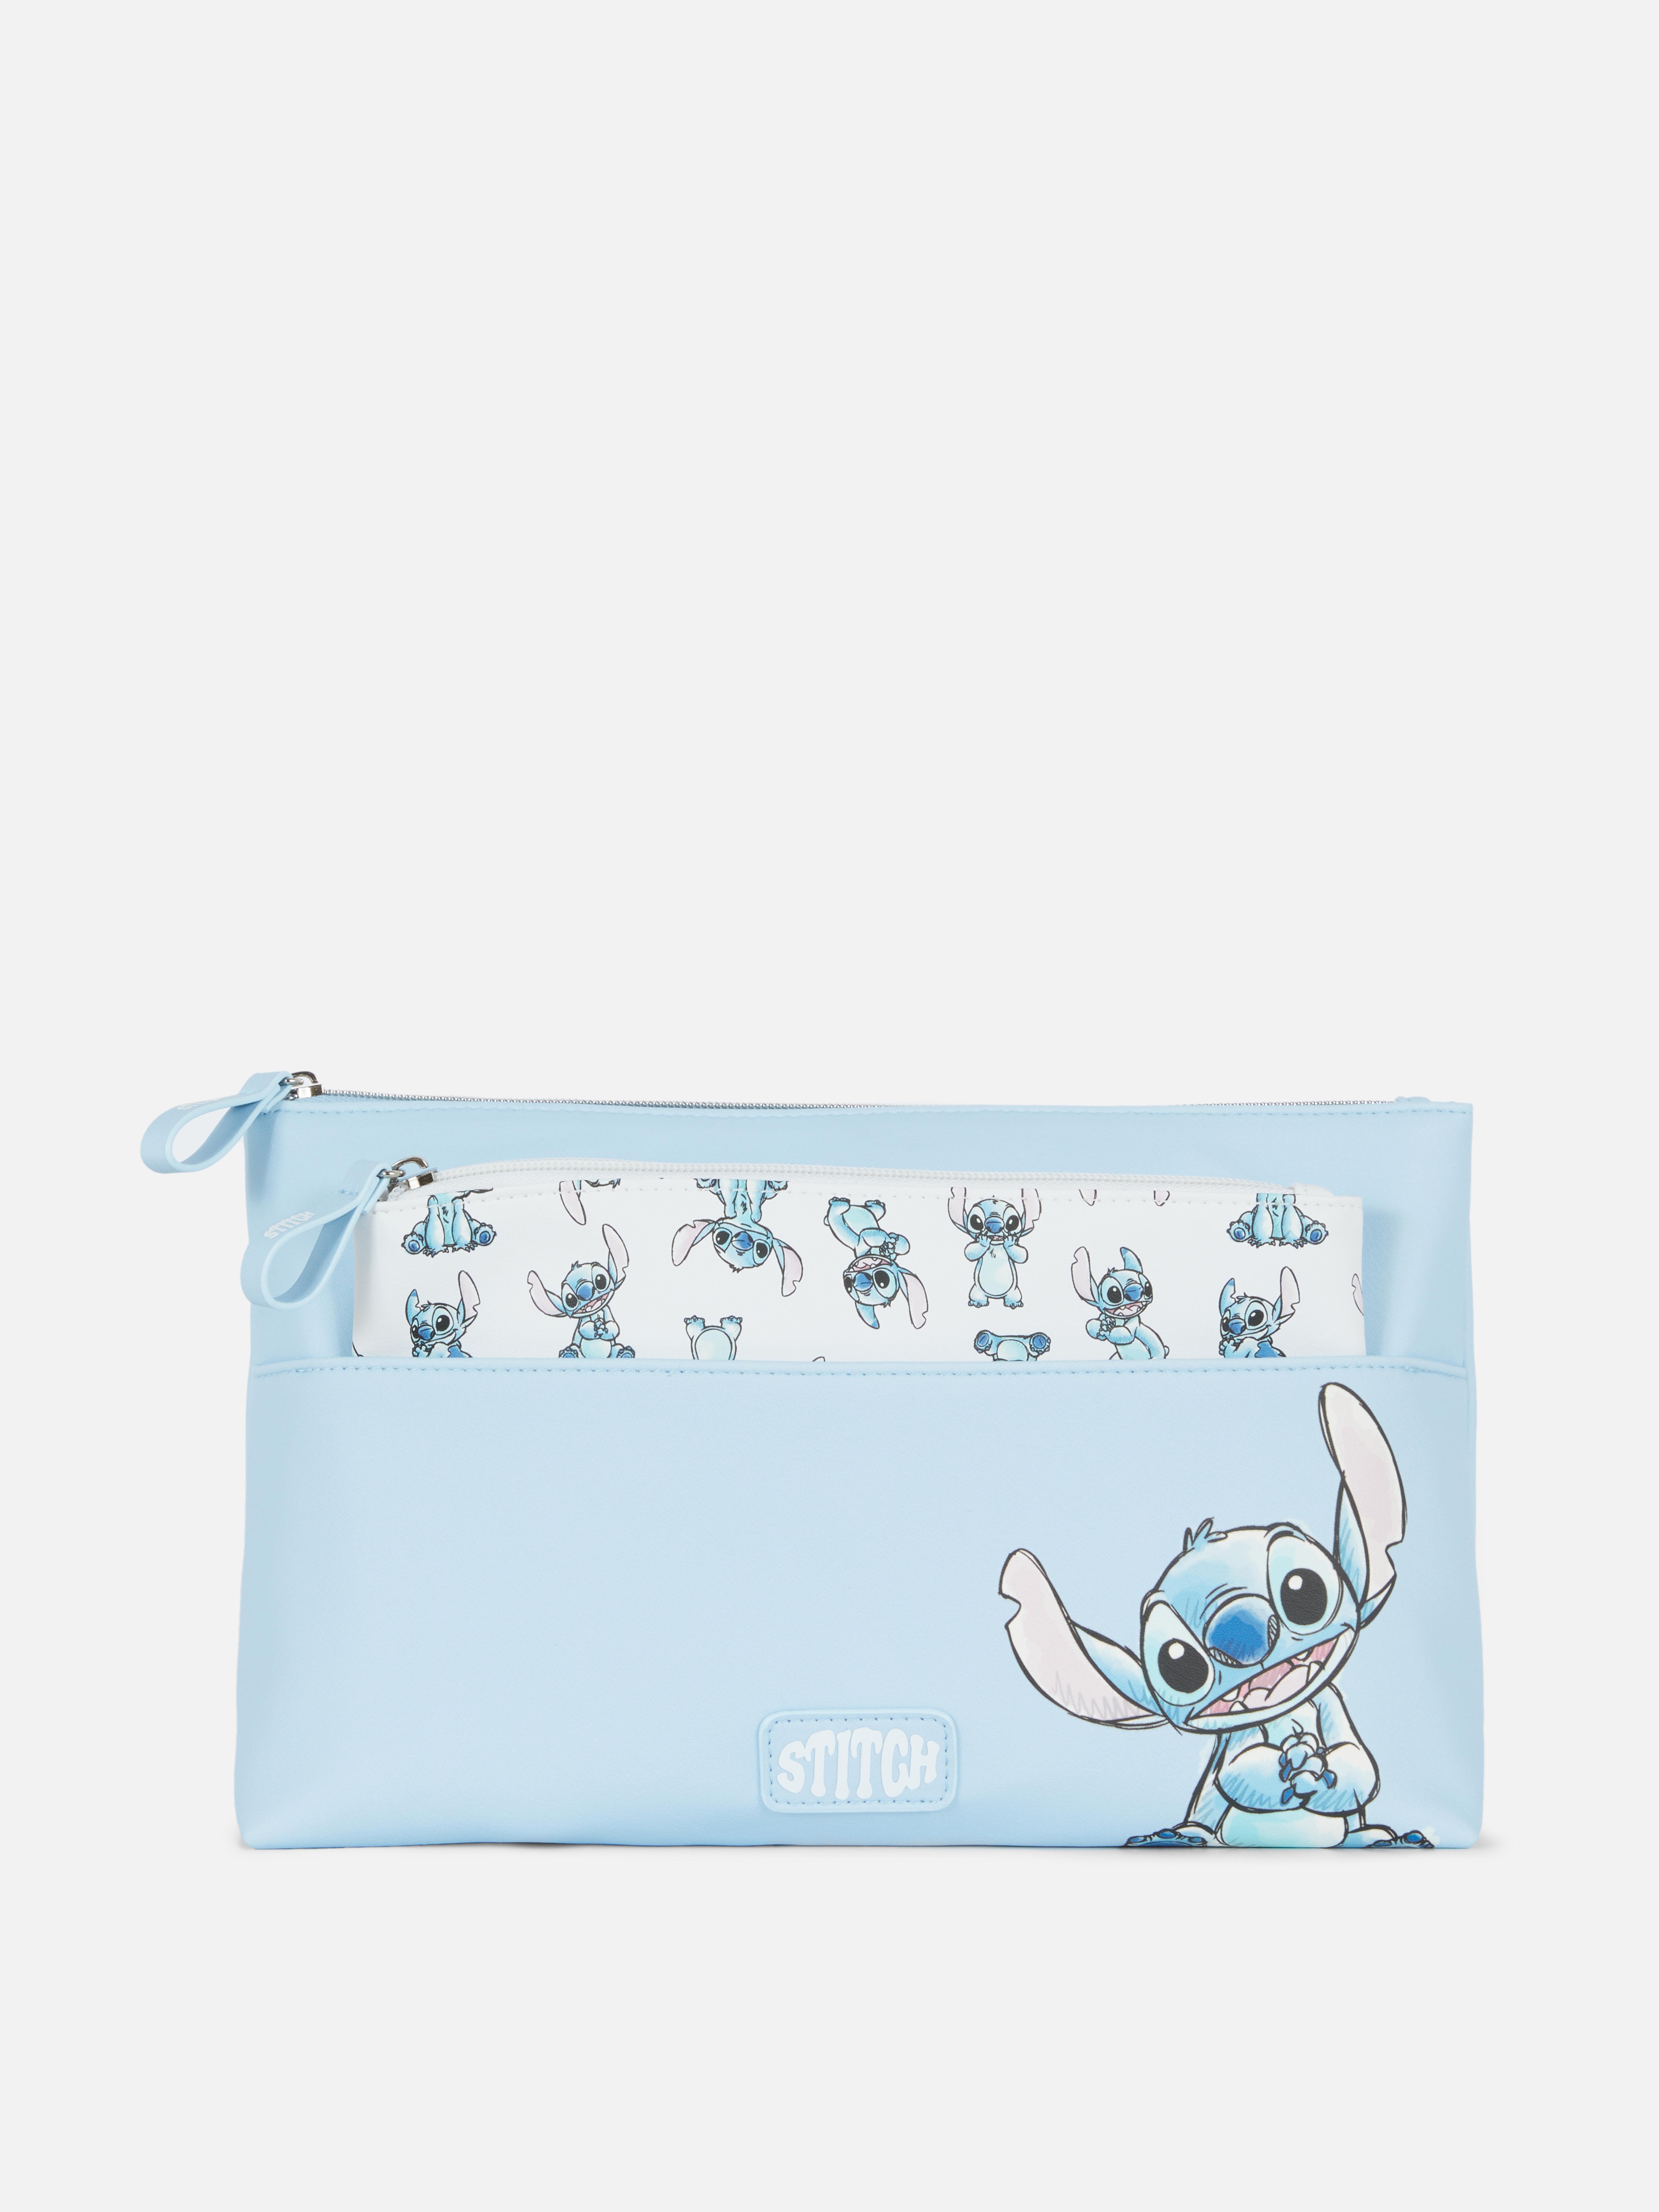 Disney's Lilo & Stitch Two in One Makeup Bags